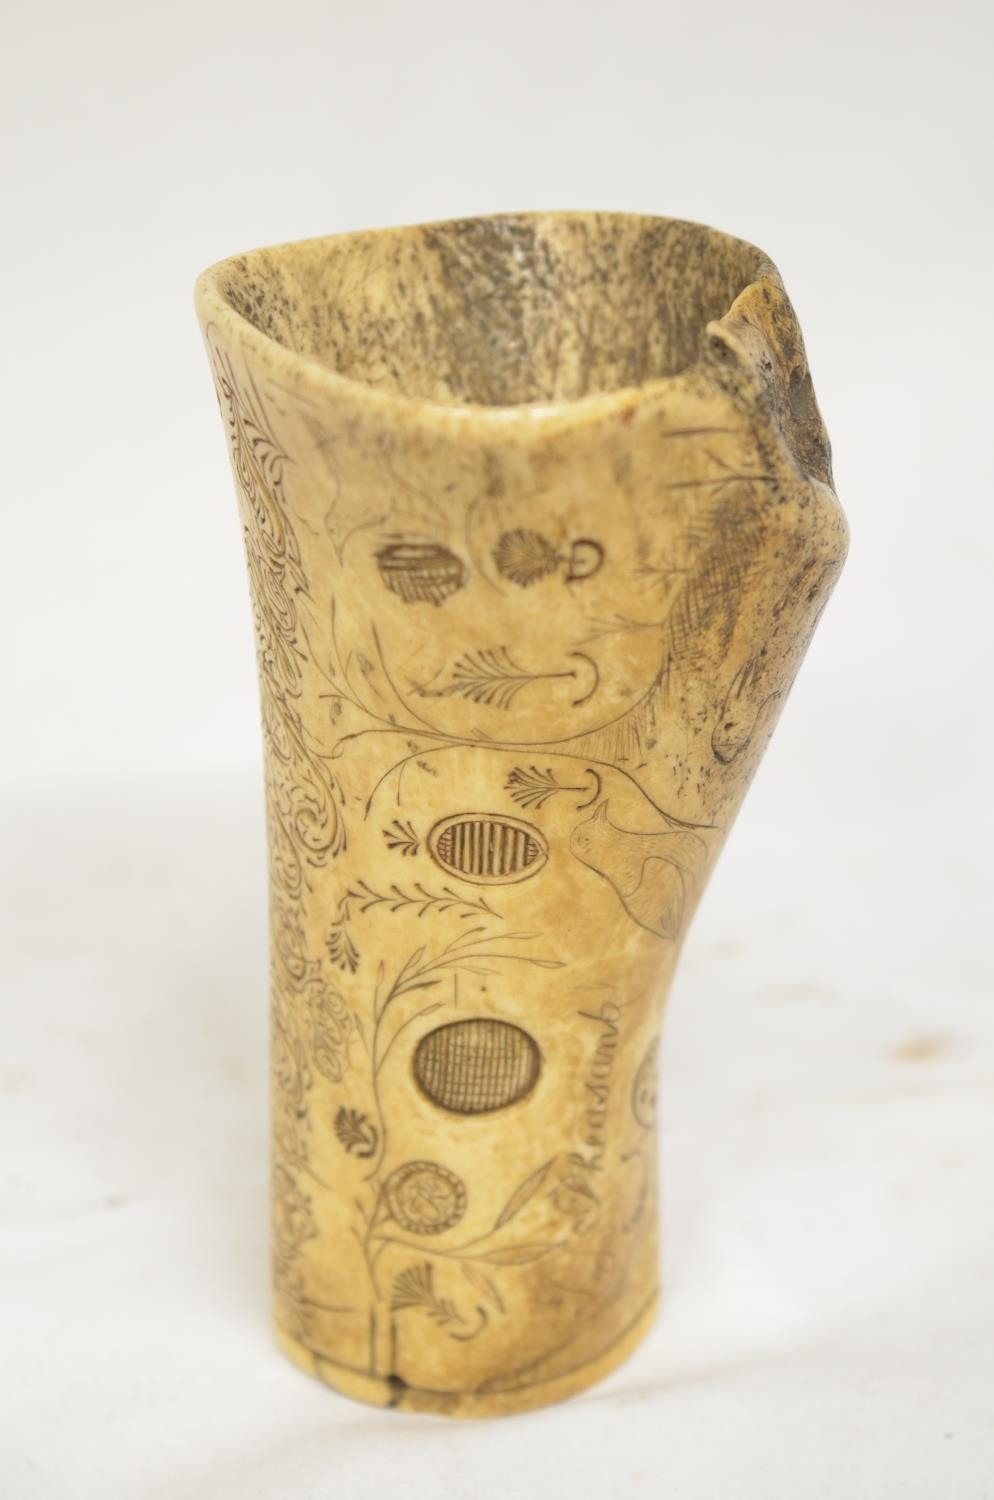 Bone quill holder with scrimshaw design including alphabet, numbers, animals and various symbols and - Image 2 of 6